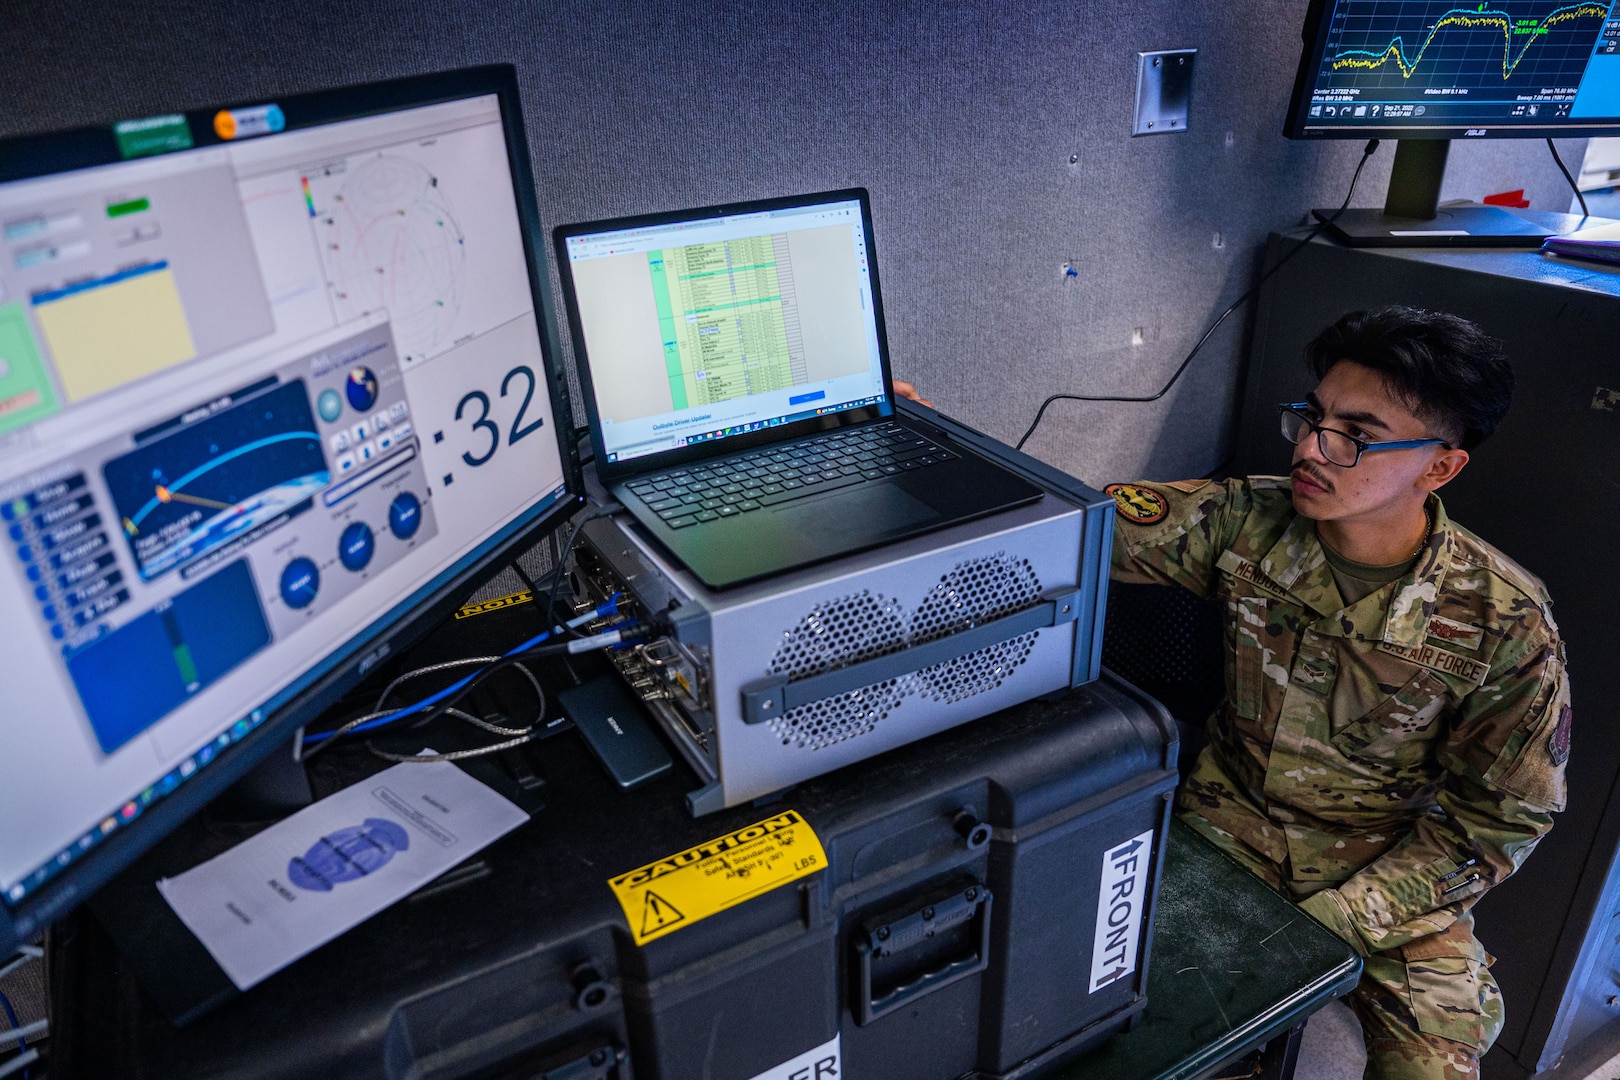 U.S. Air Force Airman 1st Class Mendoza, 216th Space Control Squadron space systems operator, utilizes a ‘Honey Badger System’ during BLACK SKIES 22 at Vandenberg Space Force Base, Calif., Sept. 20, 2022. The 216 SPCS specializes in electromagnetic warfare and participated in the Space Training and Readiness Command’s (STARCOM) BLACK SKIES 22 along with numerous other units from California to Colorado.